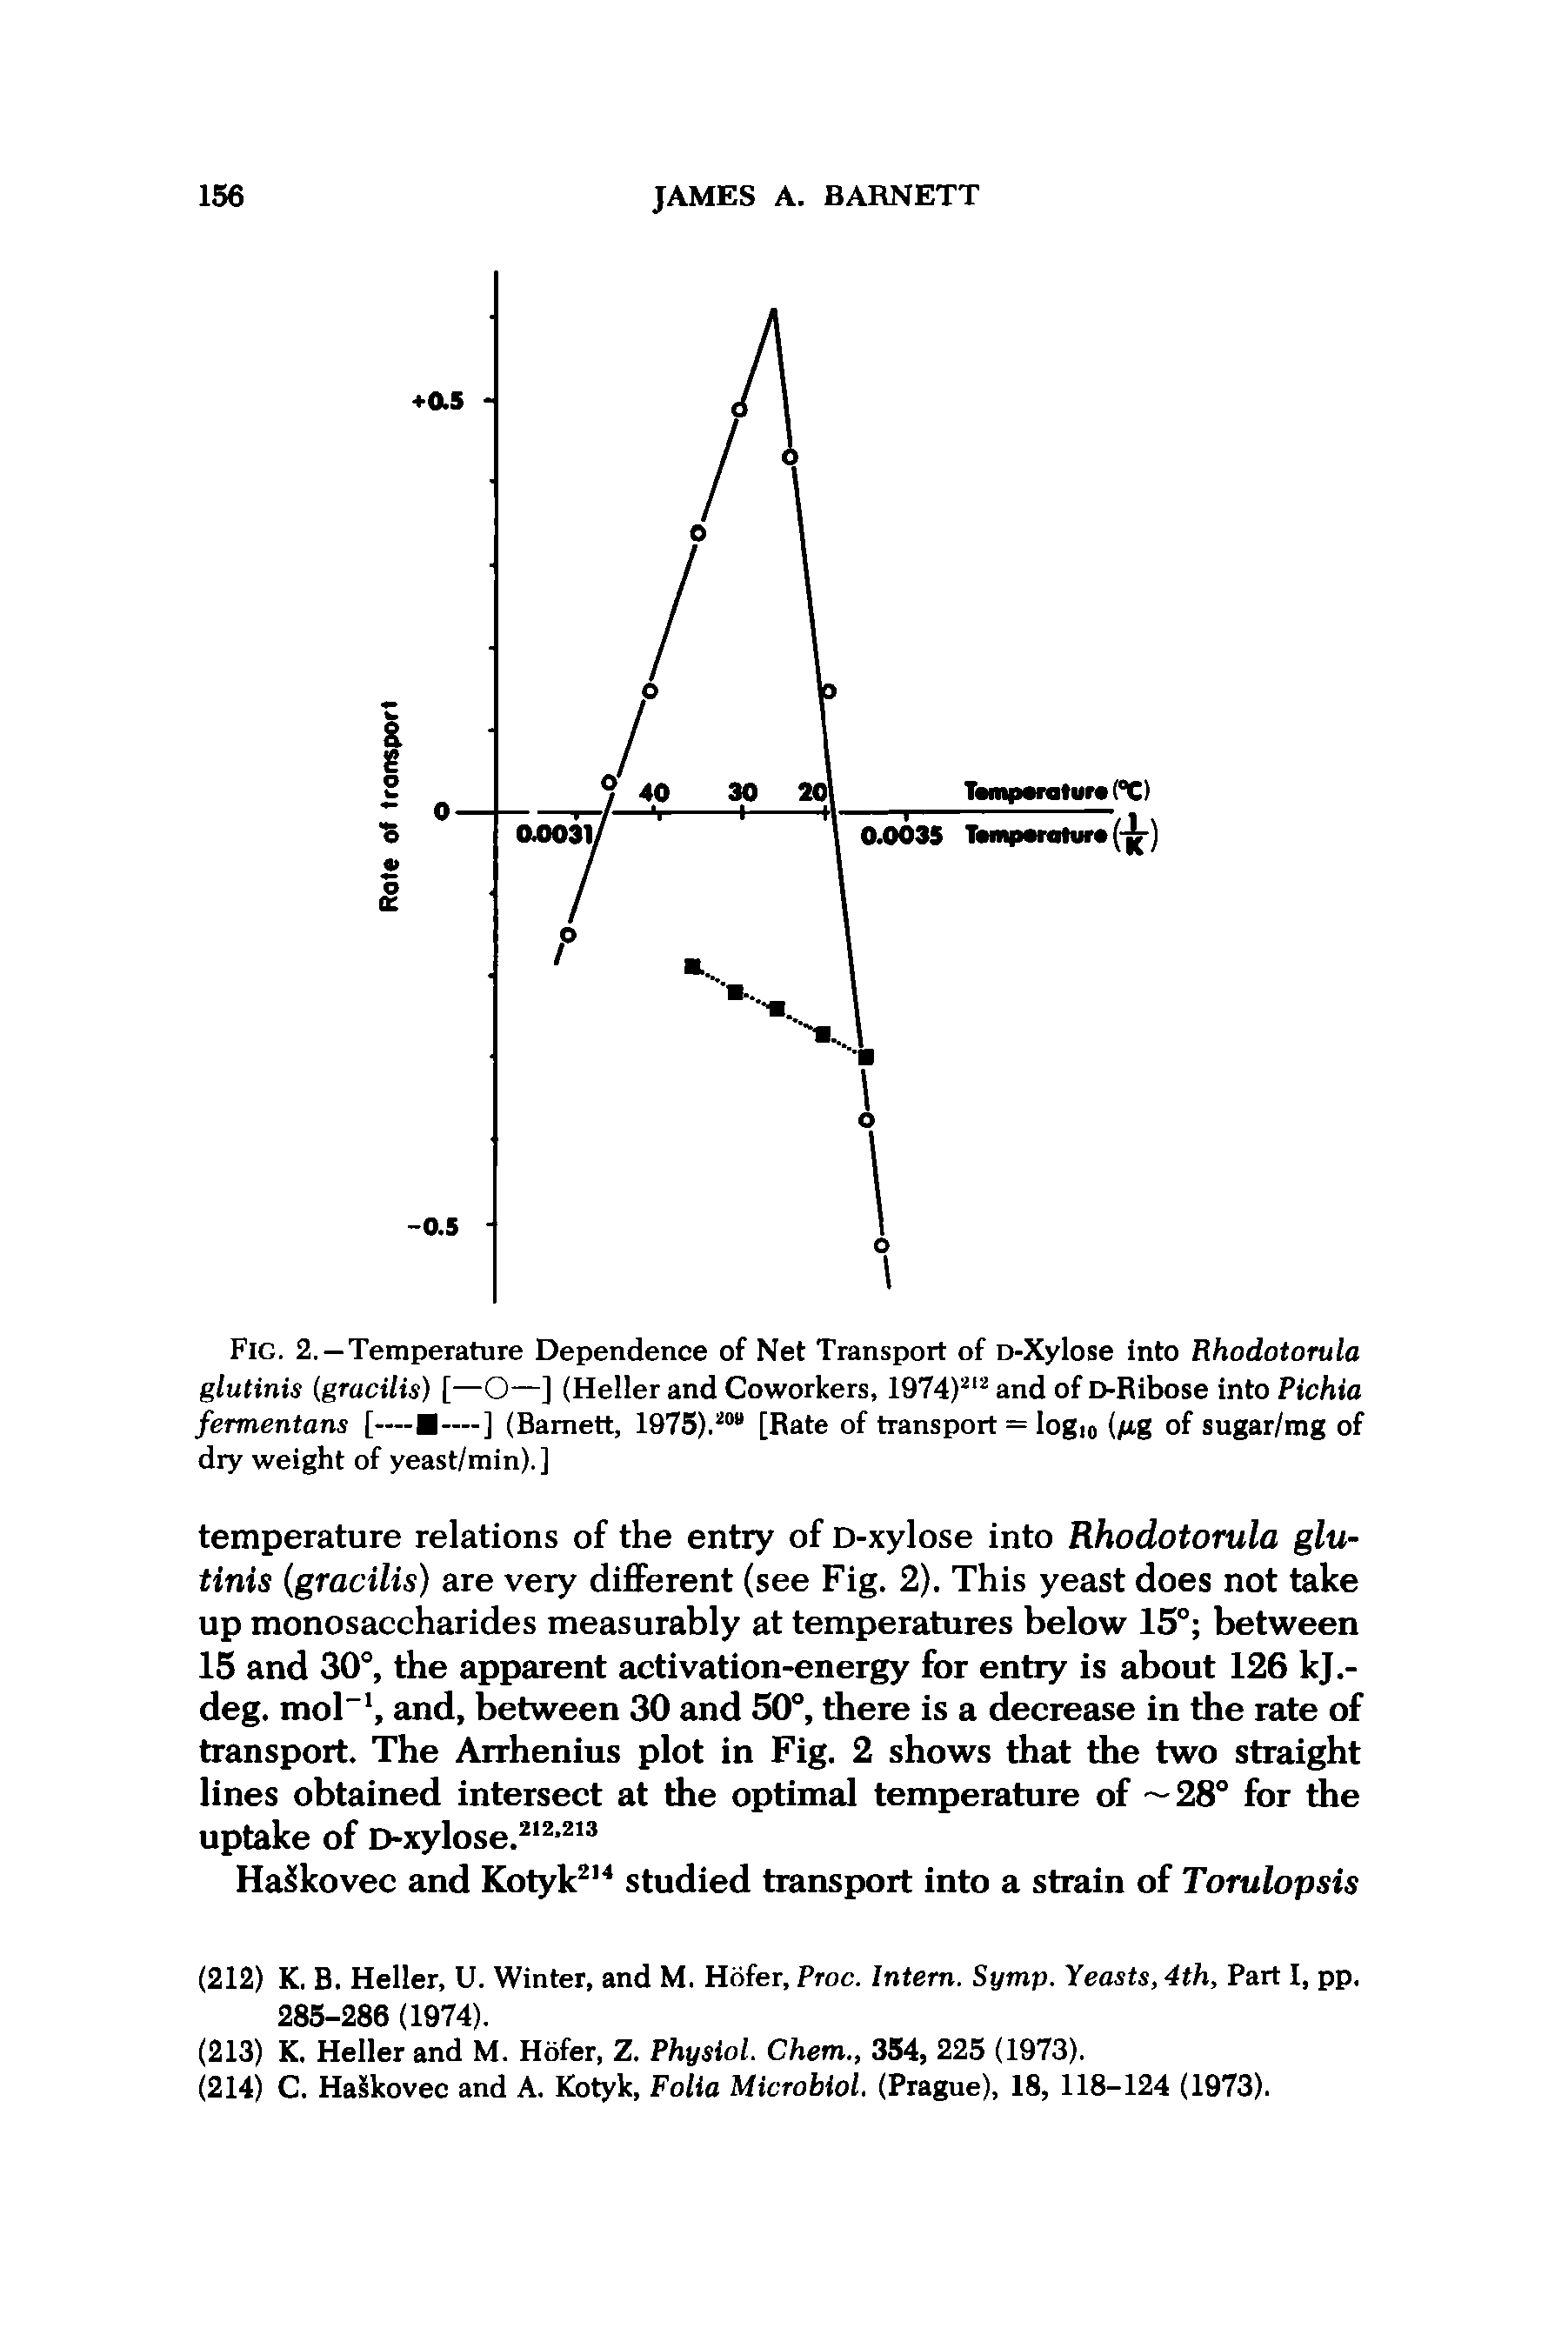 Fig. 2. —Temperature Dependence of Net Transport of D-Xylose into Rhodotorula glutinis (gracilis) [—O—] (Heller and Coworkers, 1974)212 and of D-Ribose into Pichia fermentans [— —] (Barnett, 1975).20 [Rate of transport = Iog(0 (gg of sugar/mg of dry weight of yeast/min).]...